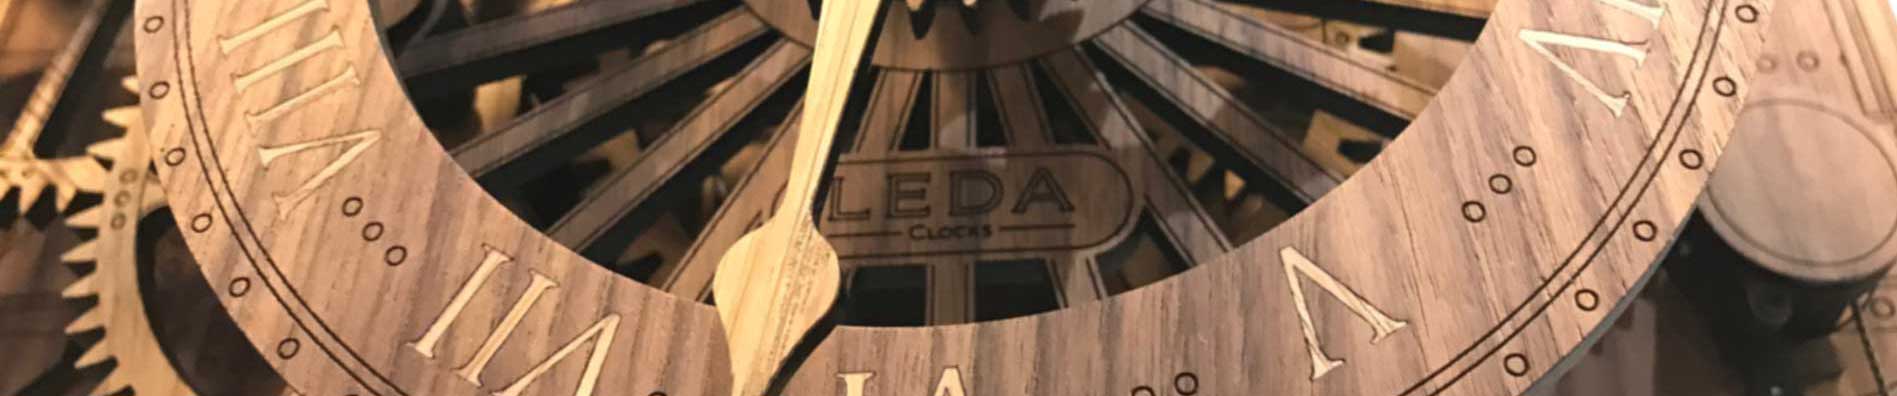 wooden walnut clock face with oak marquetry roman numerals